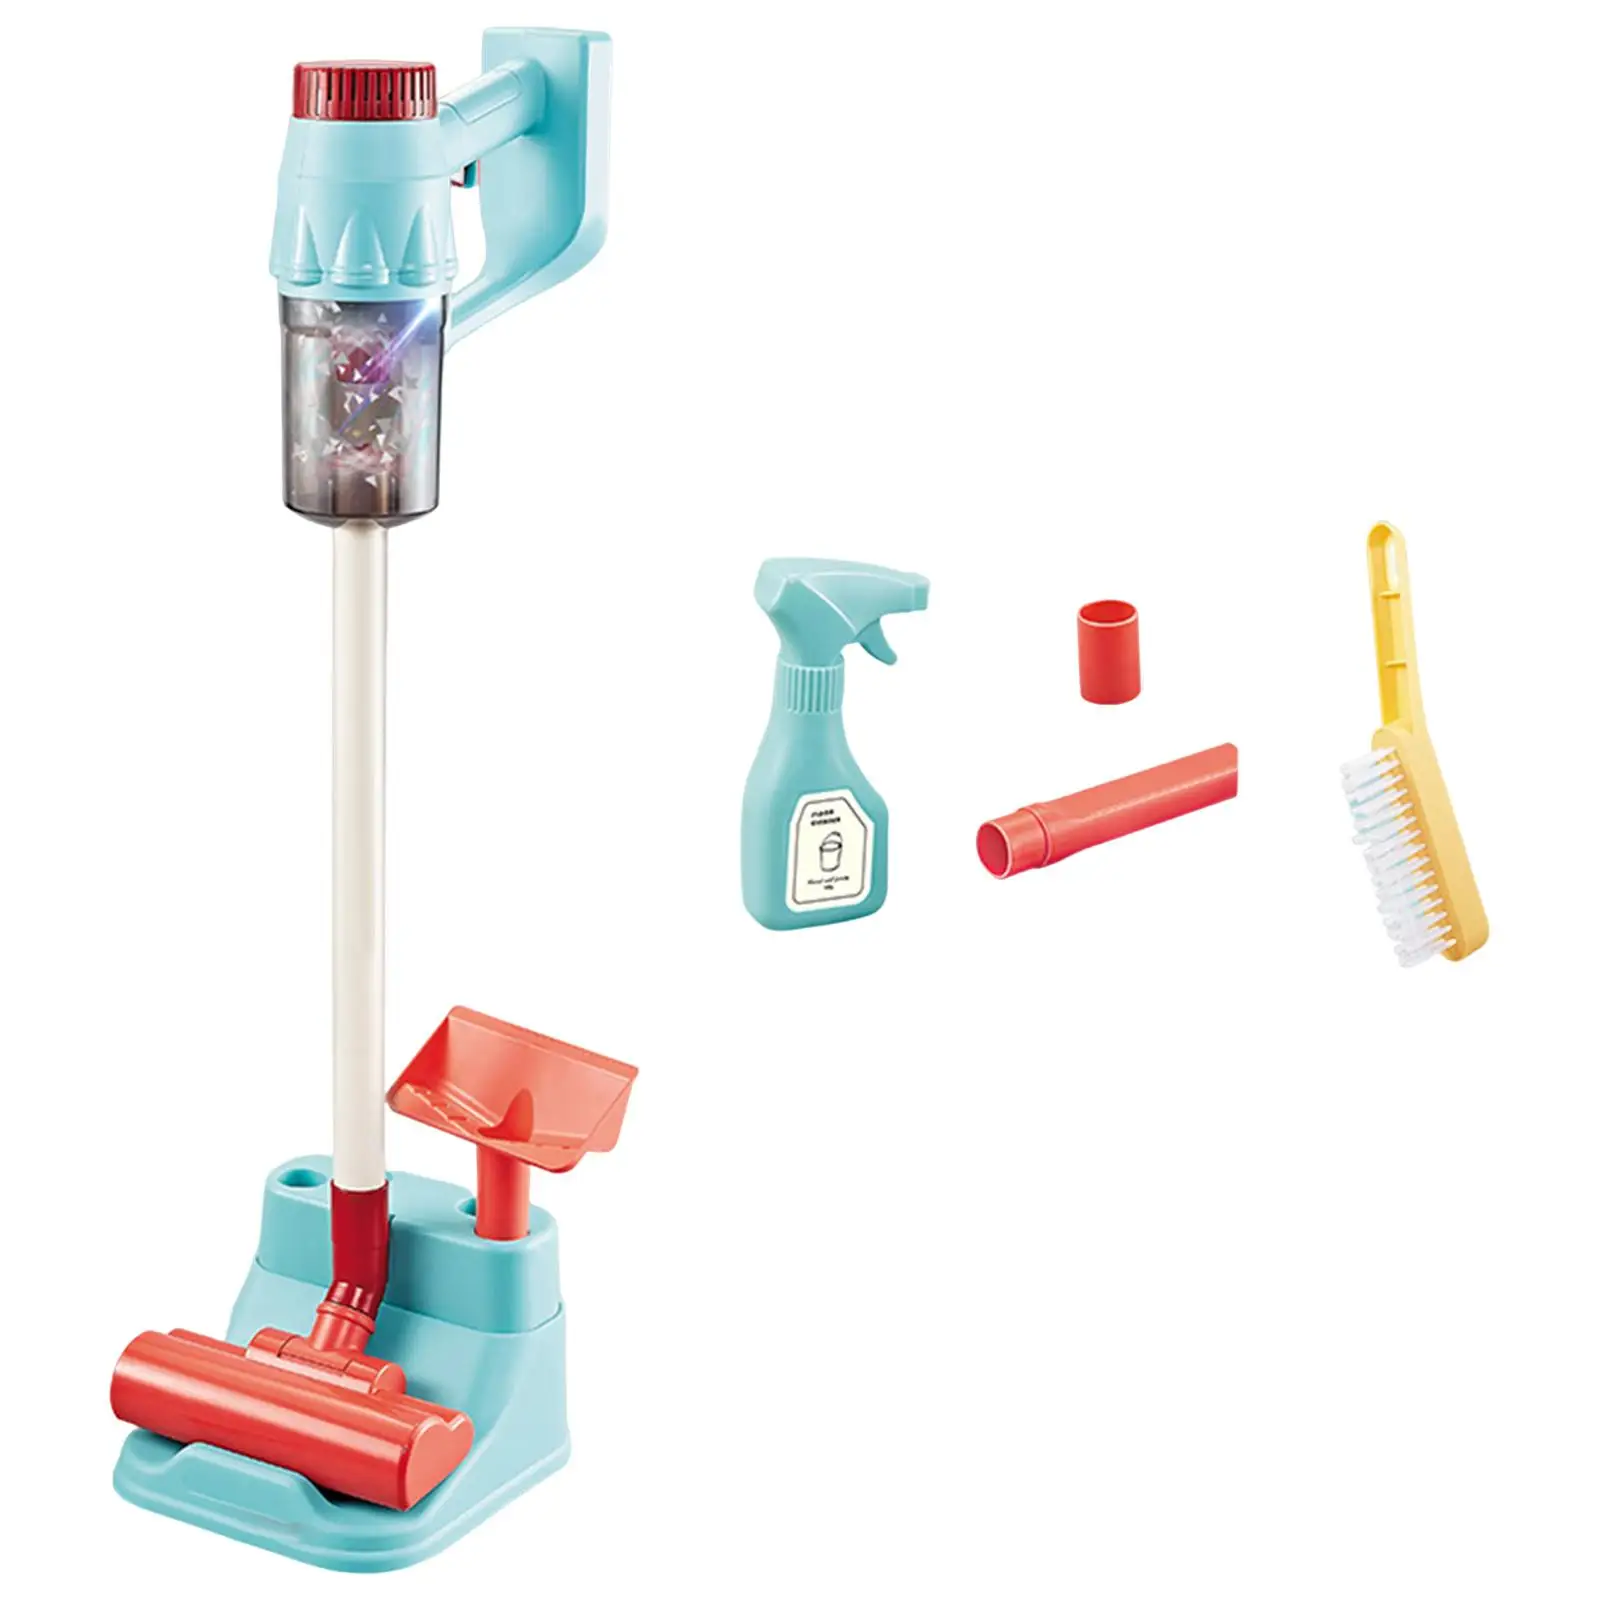 Kids Cleaner Toys Cleaning Toys Basic Skills Cleaning Tools for Girls